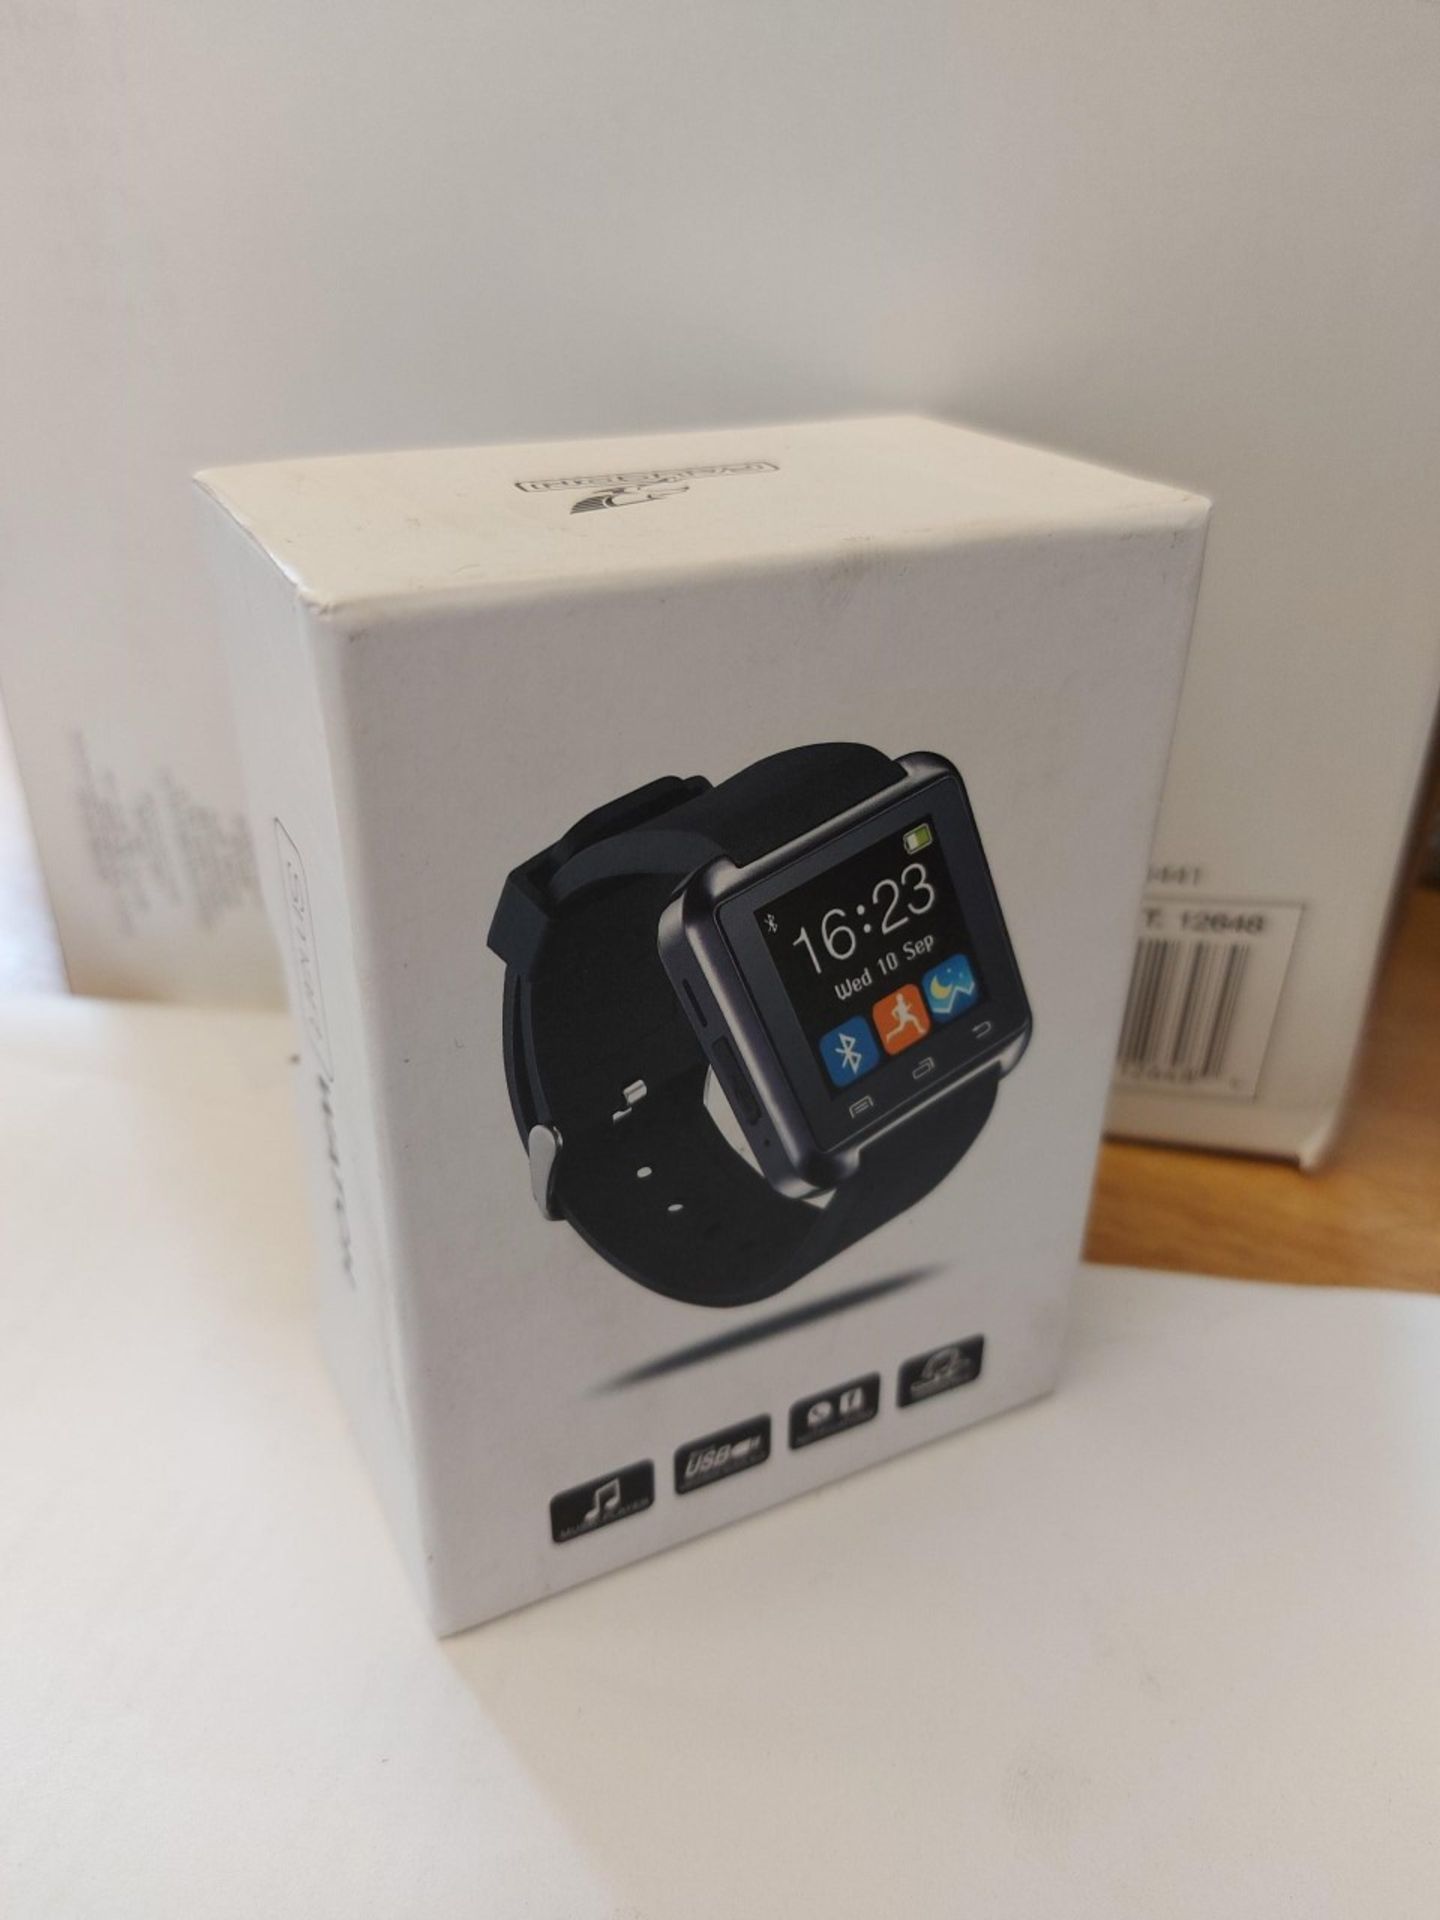 6 X NEW BOXED FALCON SMART WATCHES. MUSIC PLAYER. USB. WHATSAPP & FACEBOOK NOTIFICATIONS. HANDSFREE.